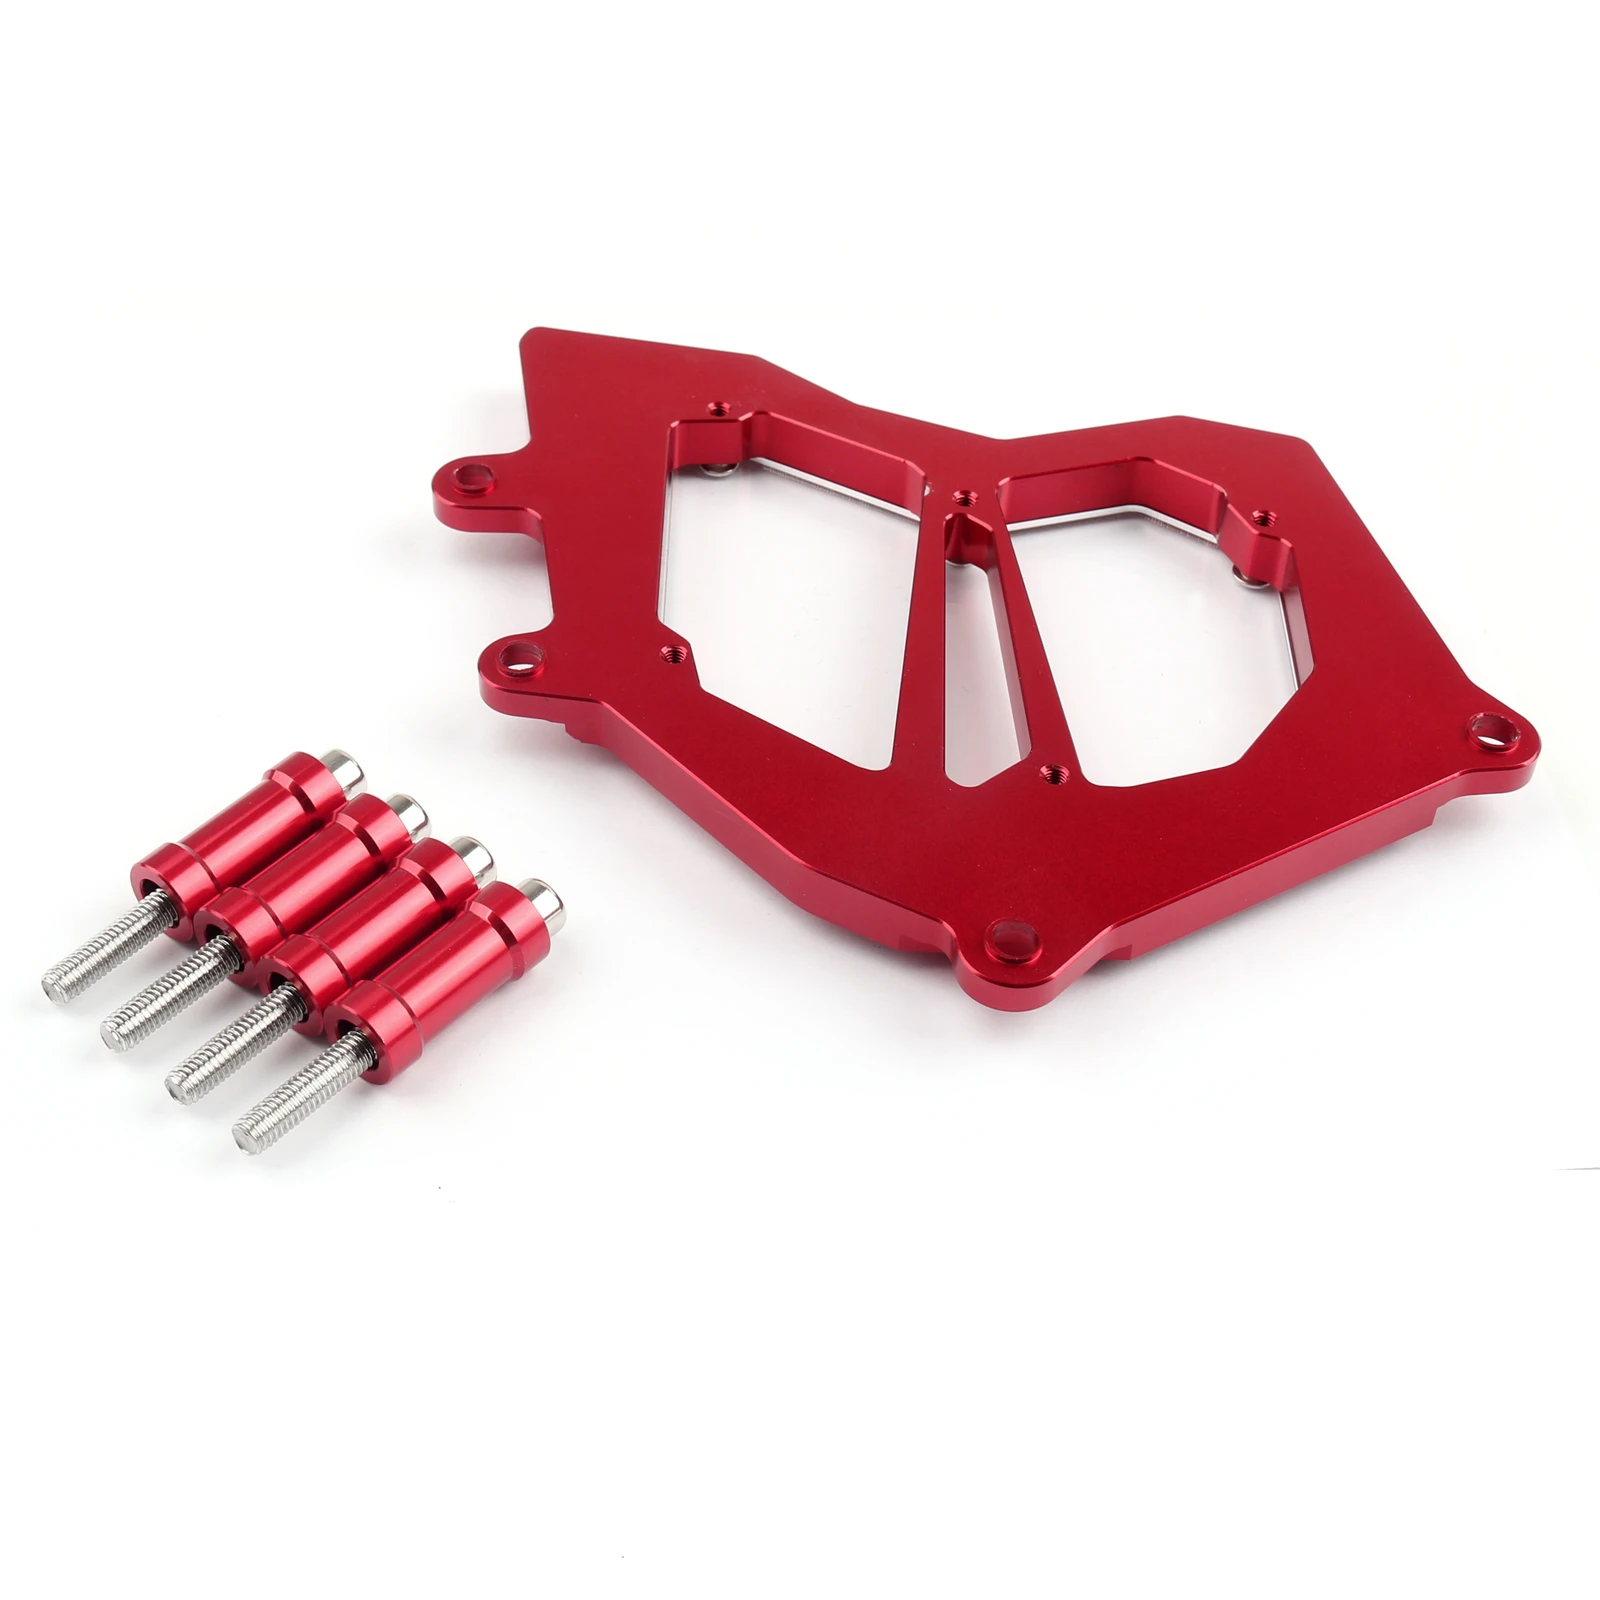 

Areyourshop Sprocket Chain Guard Cover Grill Plate For Kawasaki ZX10R Ninja 2011 12 13 14 15 2016 Red